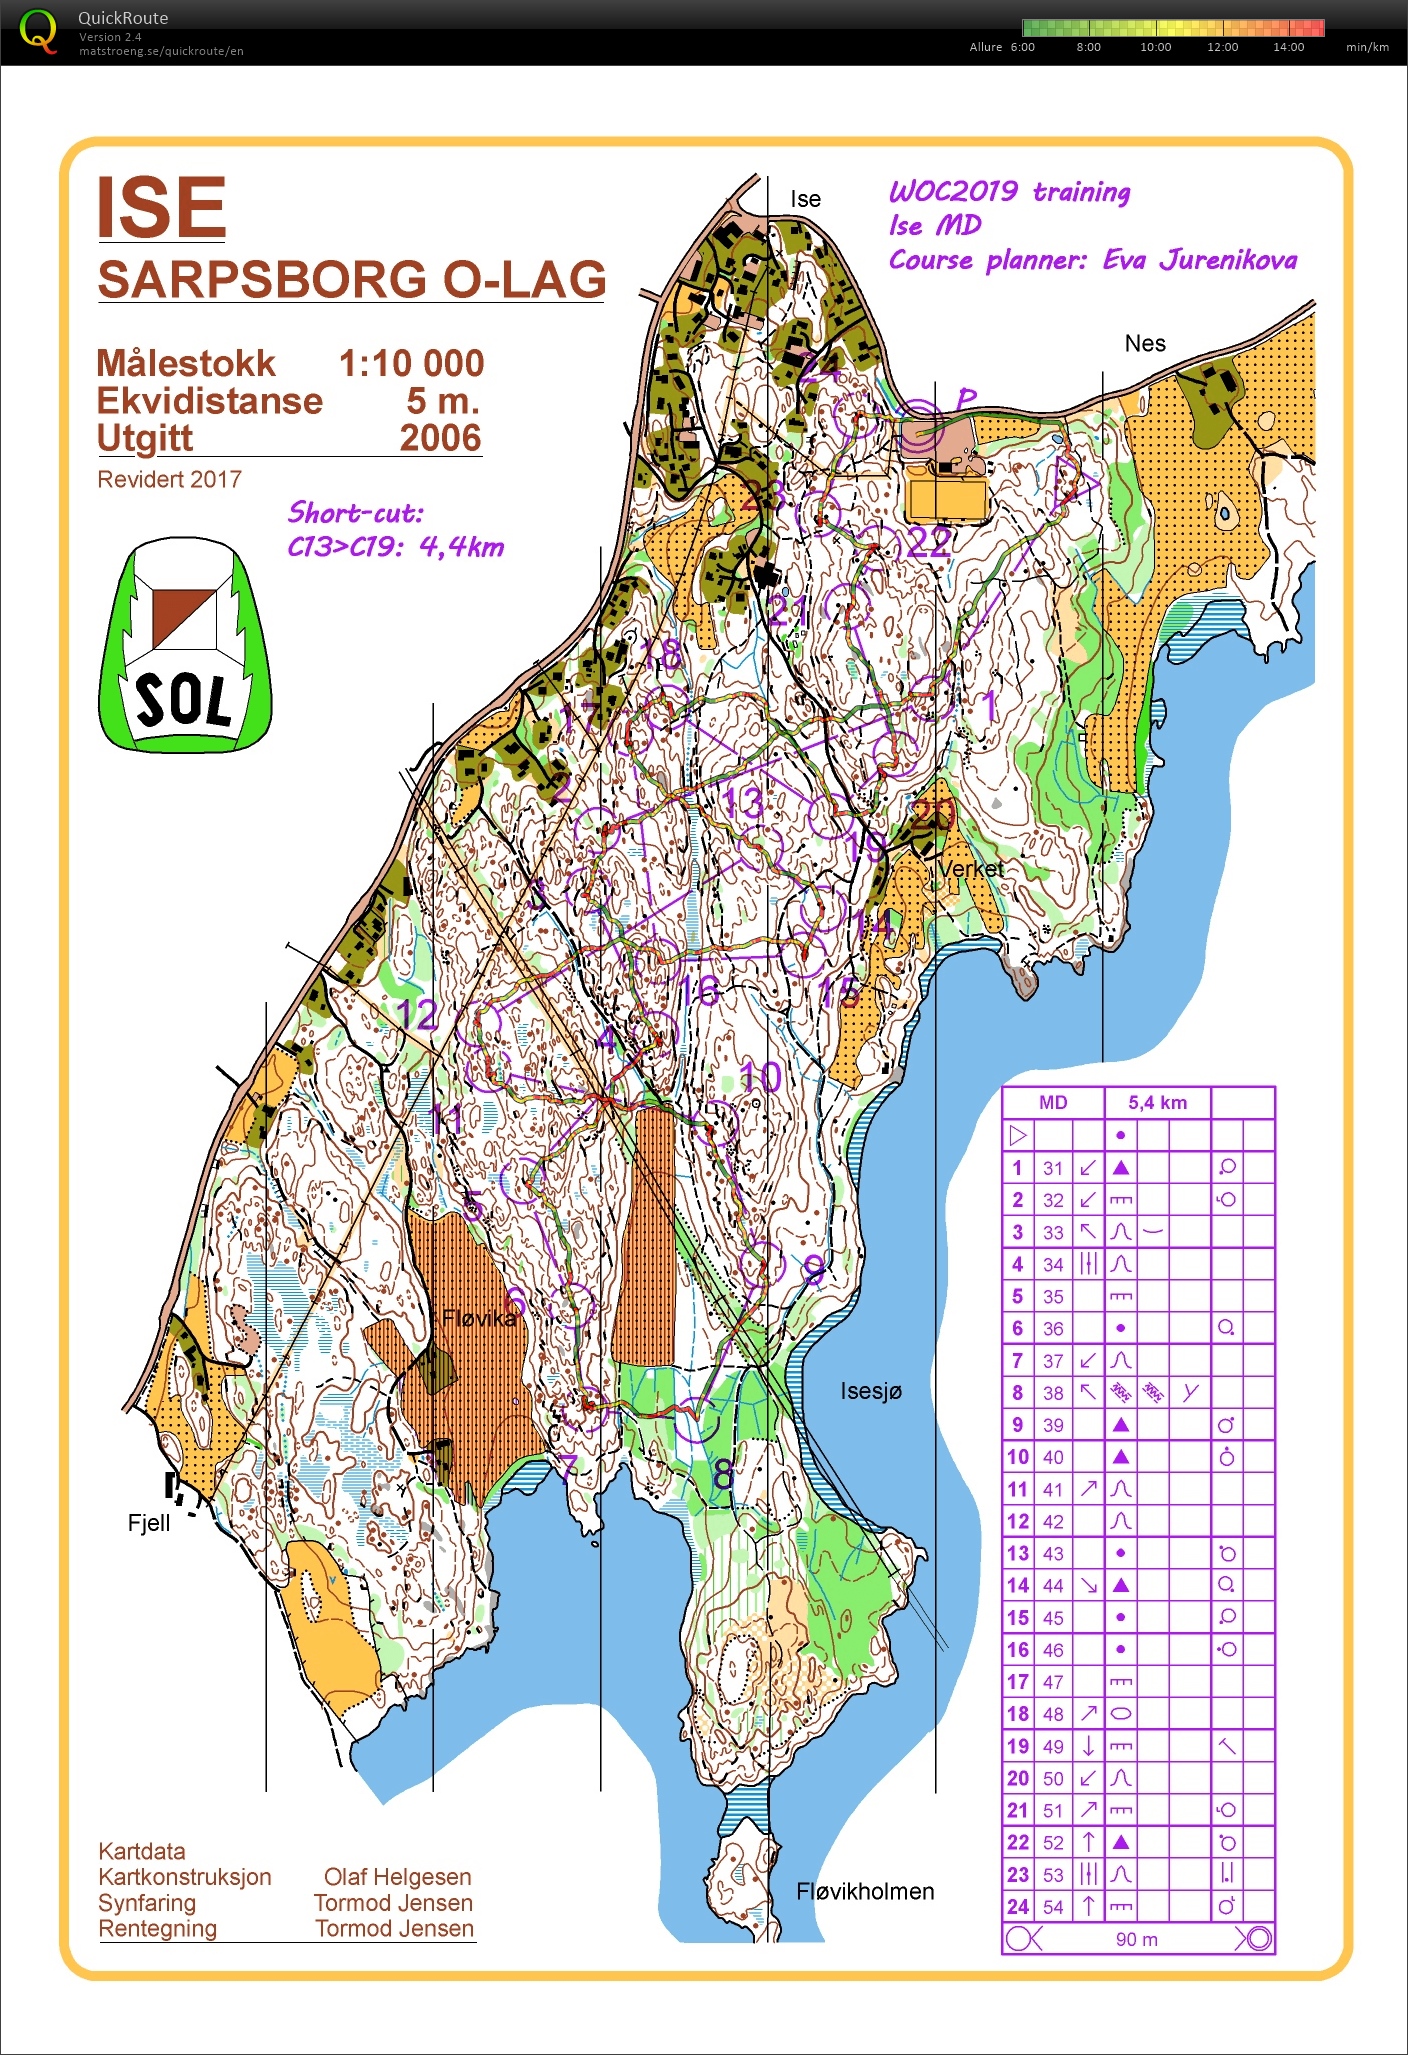 WOC 2019 training package /// pose MD Ise (13/06/2018)